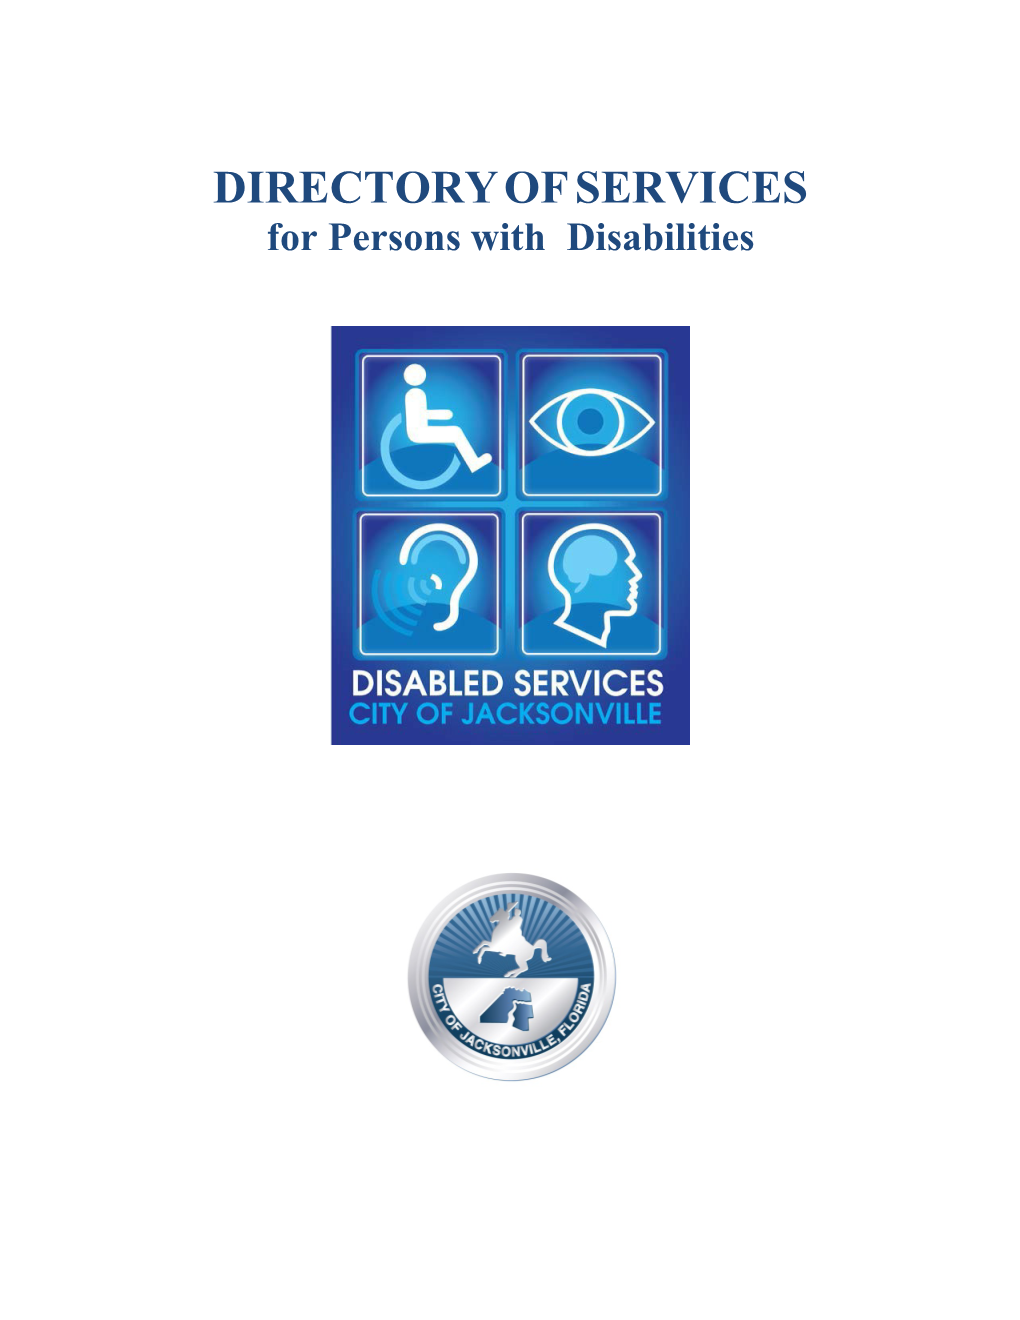 City of Jacksonville Directory of Services for Persons